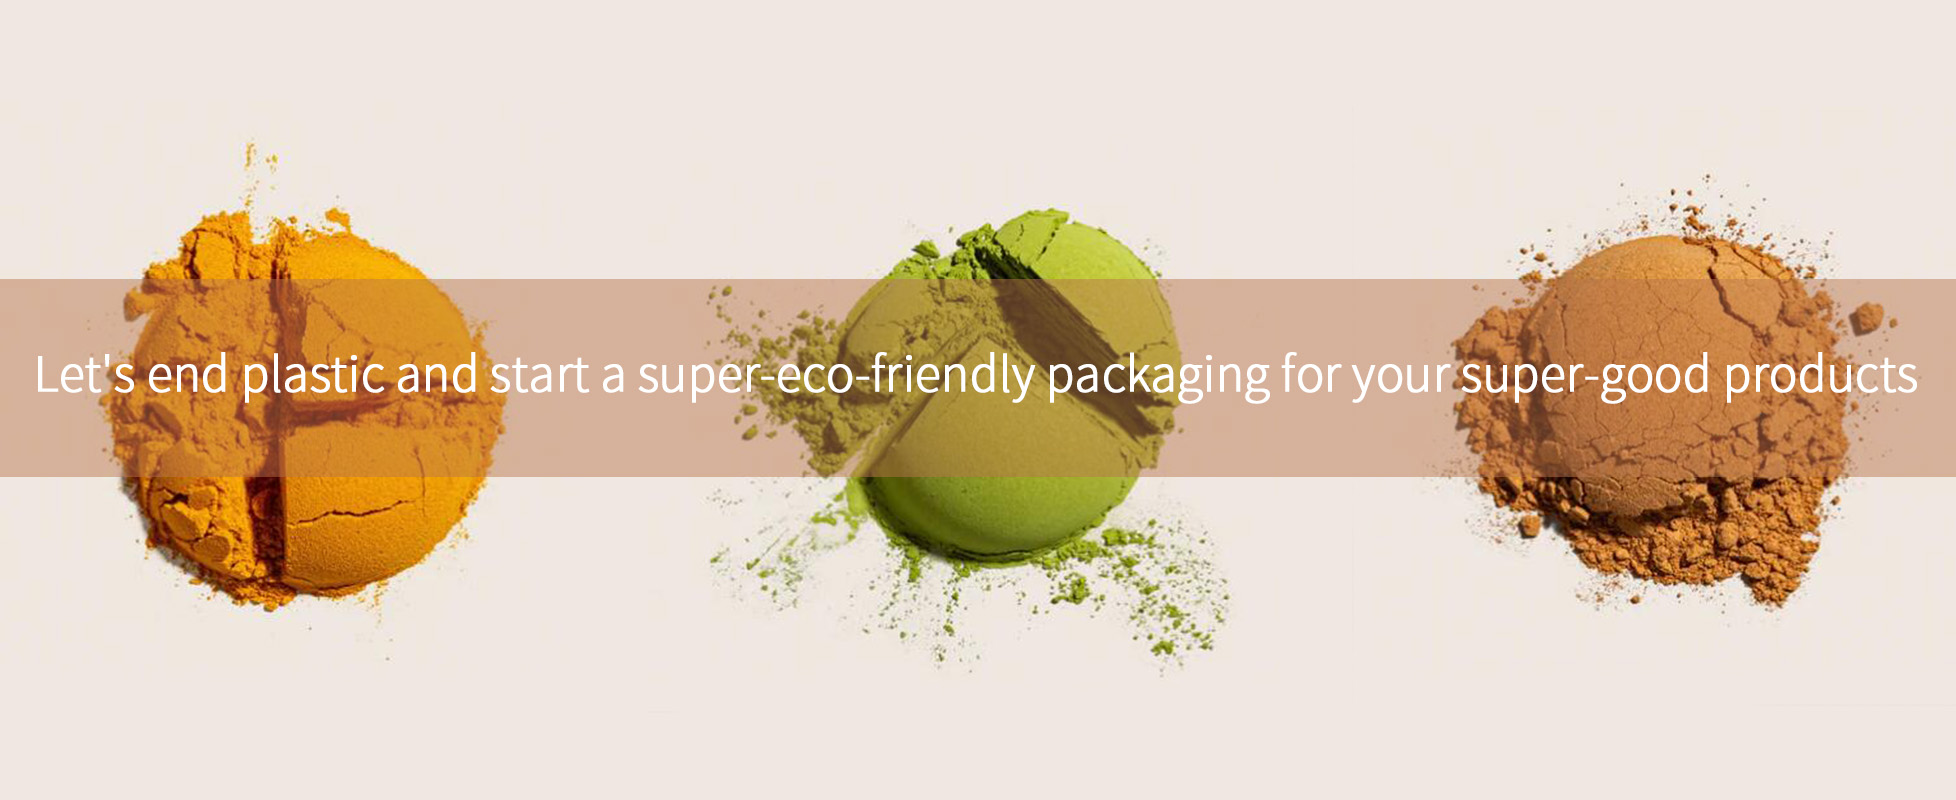 Let’s end plastic and start a super-eco-friendly packaging for your super-good products